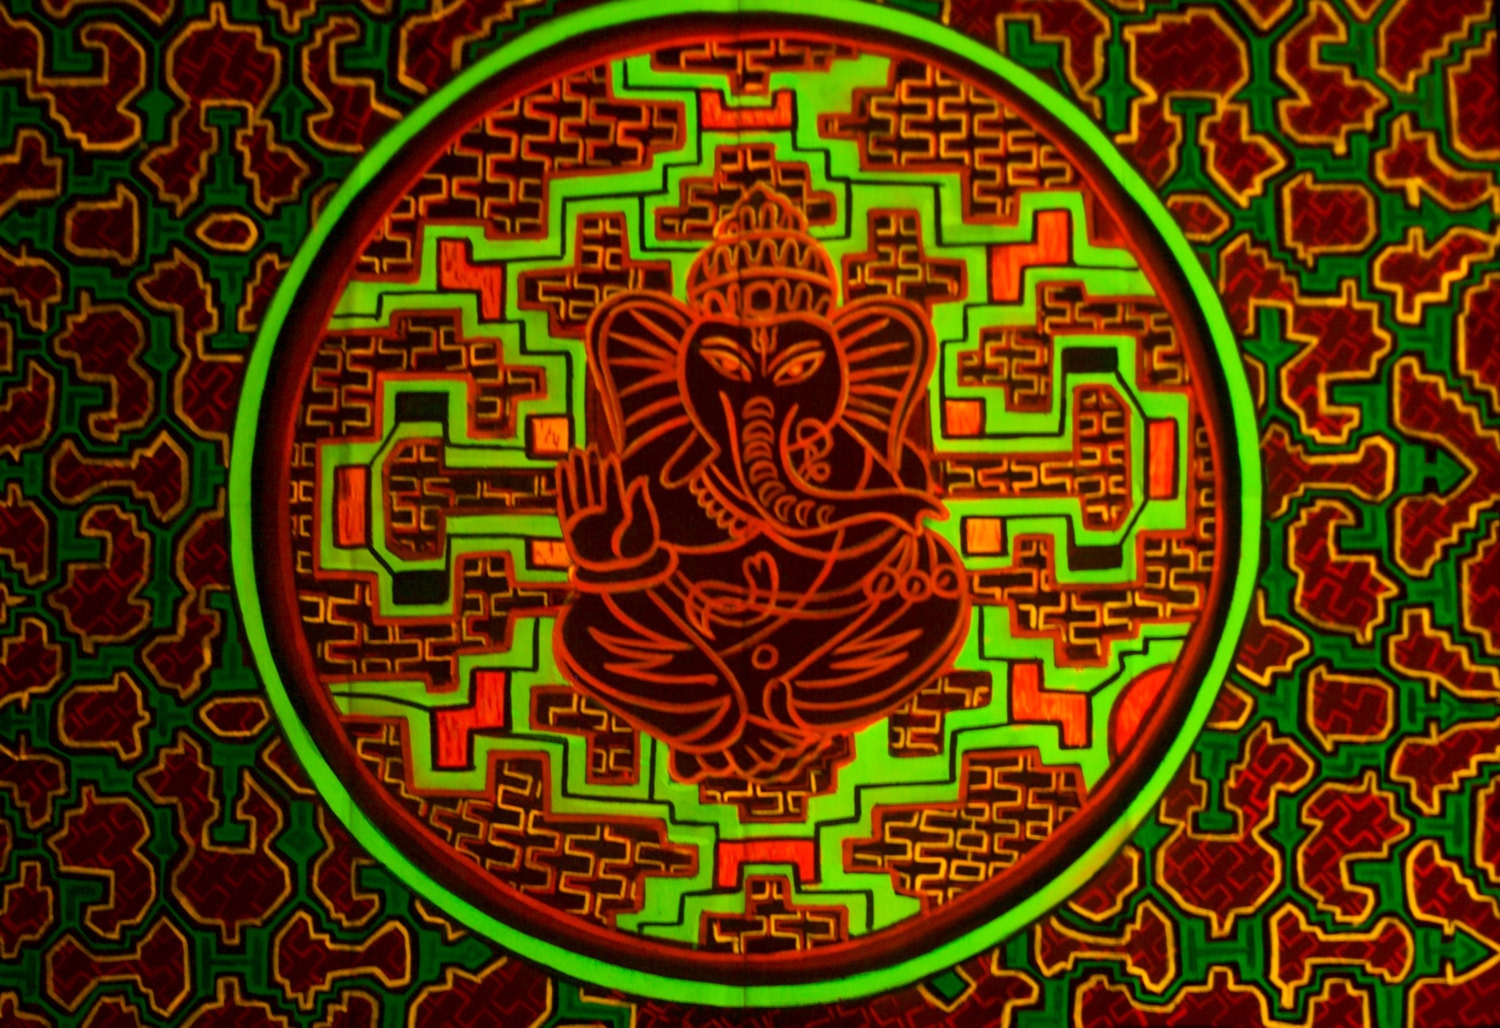 Ganesha Ayahuasca UV Painting - 90x60cm - handmade on order - fully blacklight glowing colors - psychedelic dmt visionary artwork